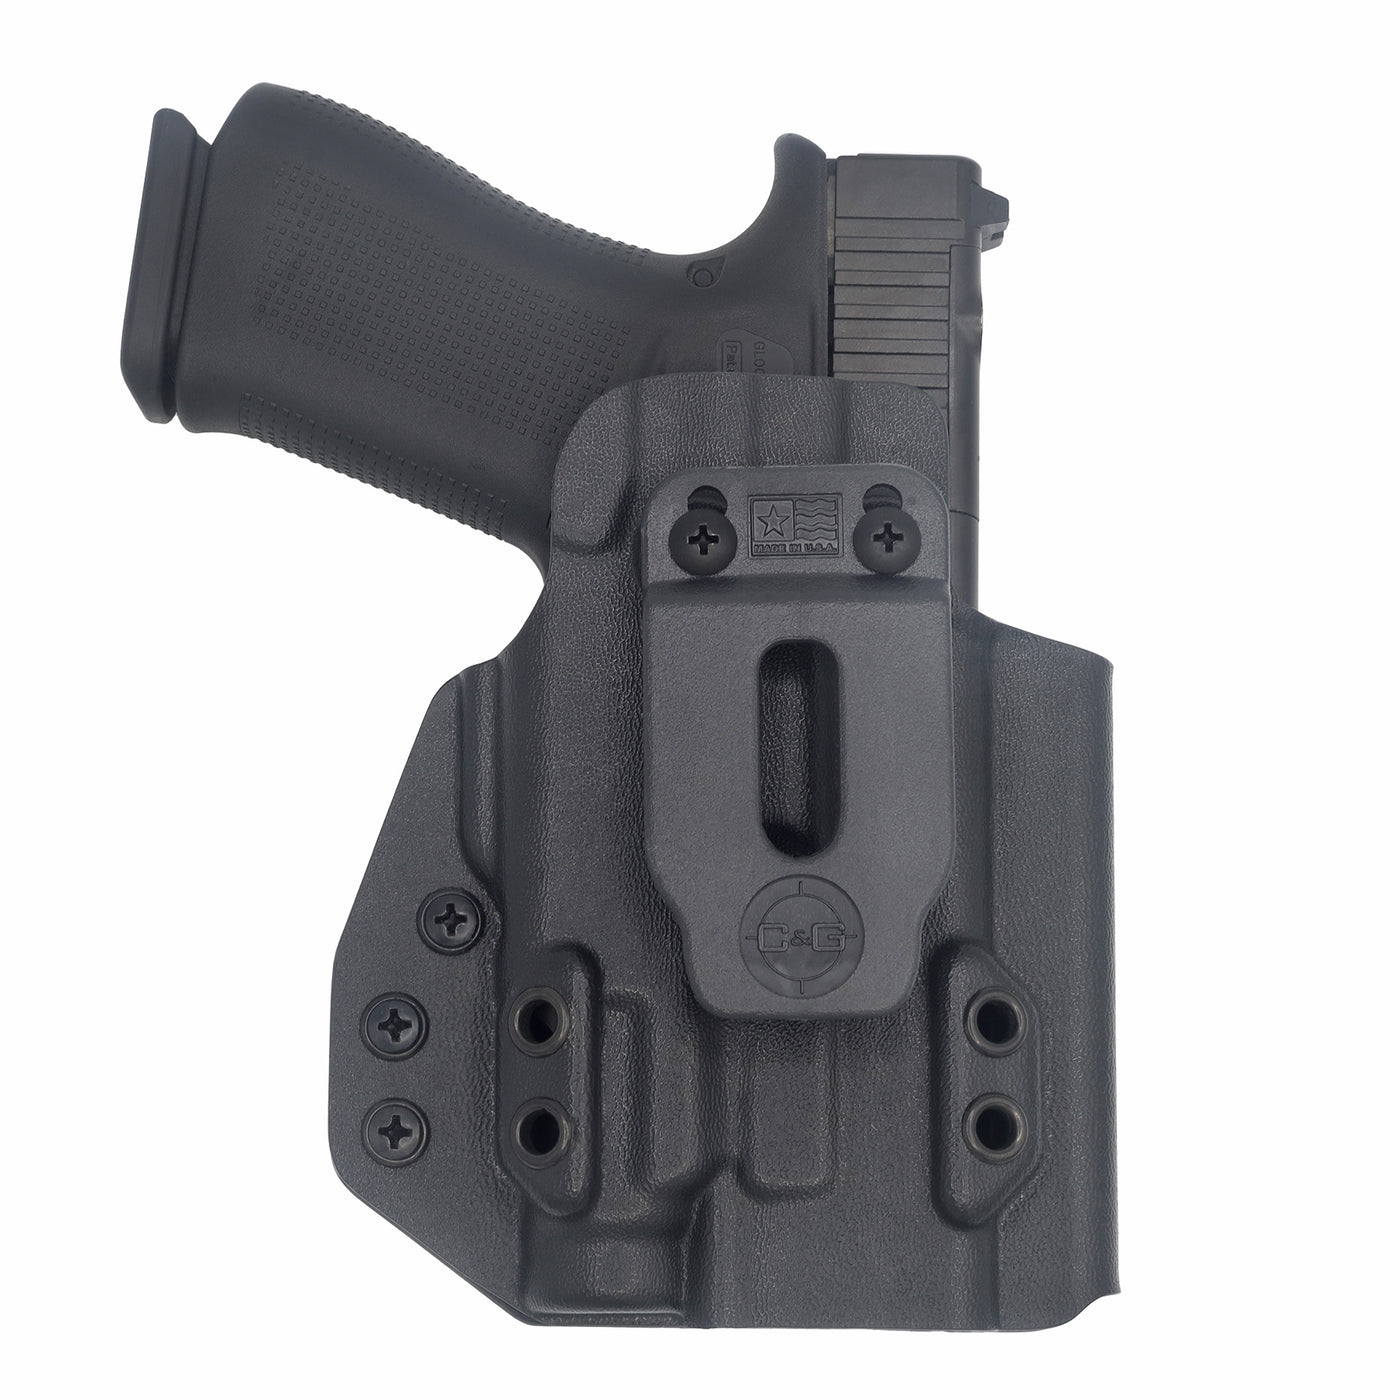 C&G Holsters Quickship IWB Tactical Glock 43x/48 Streamlight TLR-7 sub in holstered position